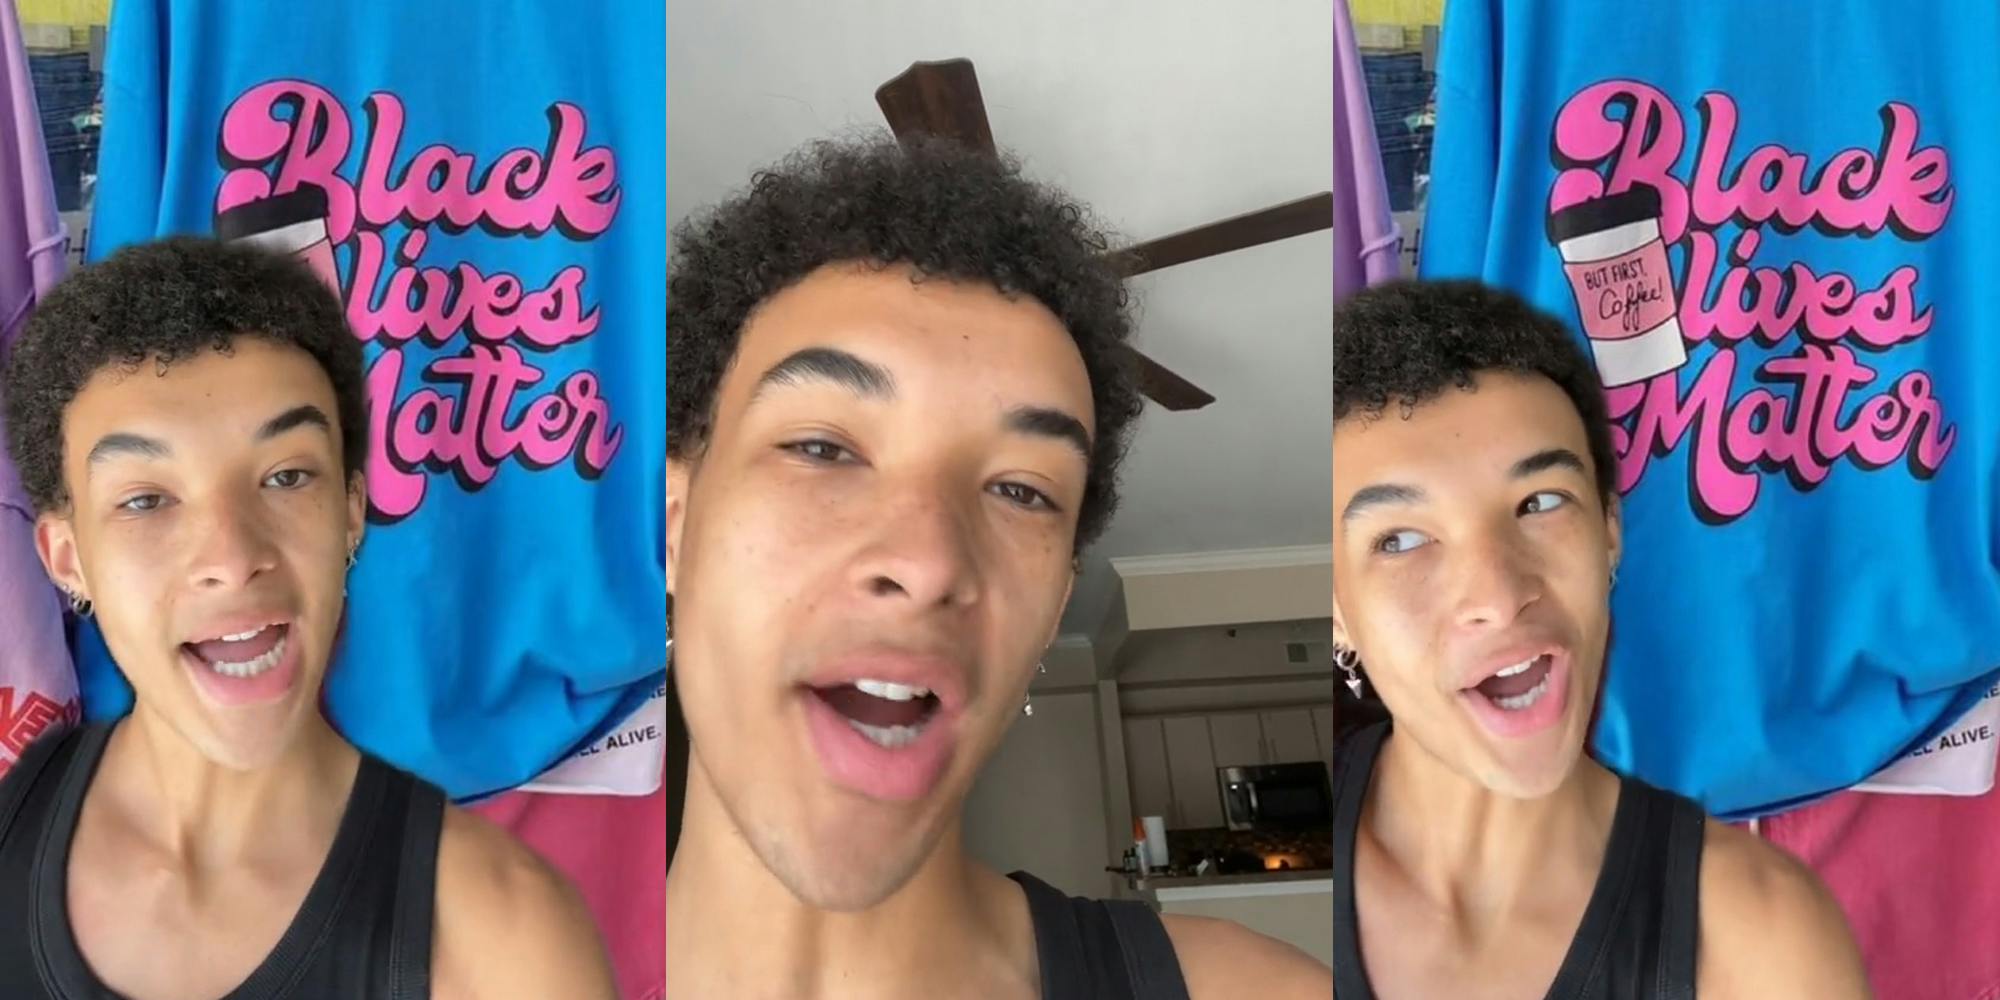 person greenscreen TikTok over image of Black Lives Matter But FIRST Coffee shirt" (l) person speaking in front of ceiling fan (c) person greenscreen TikTok over image of Black Lives Matter But FIRST Coffee shirt" (r)